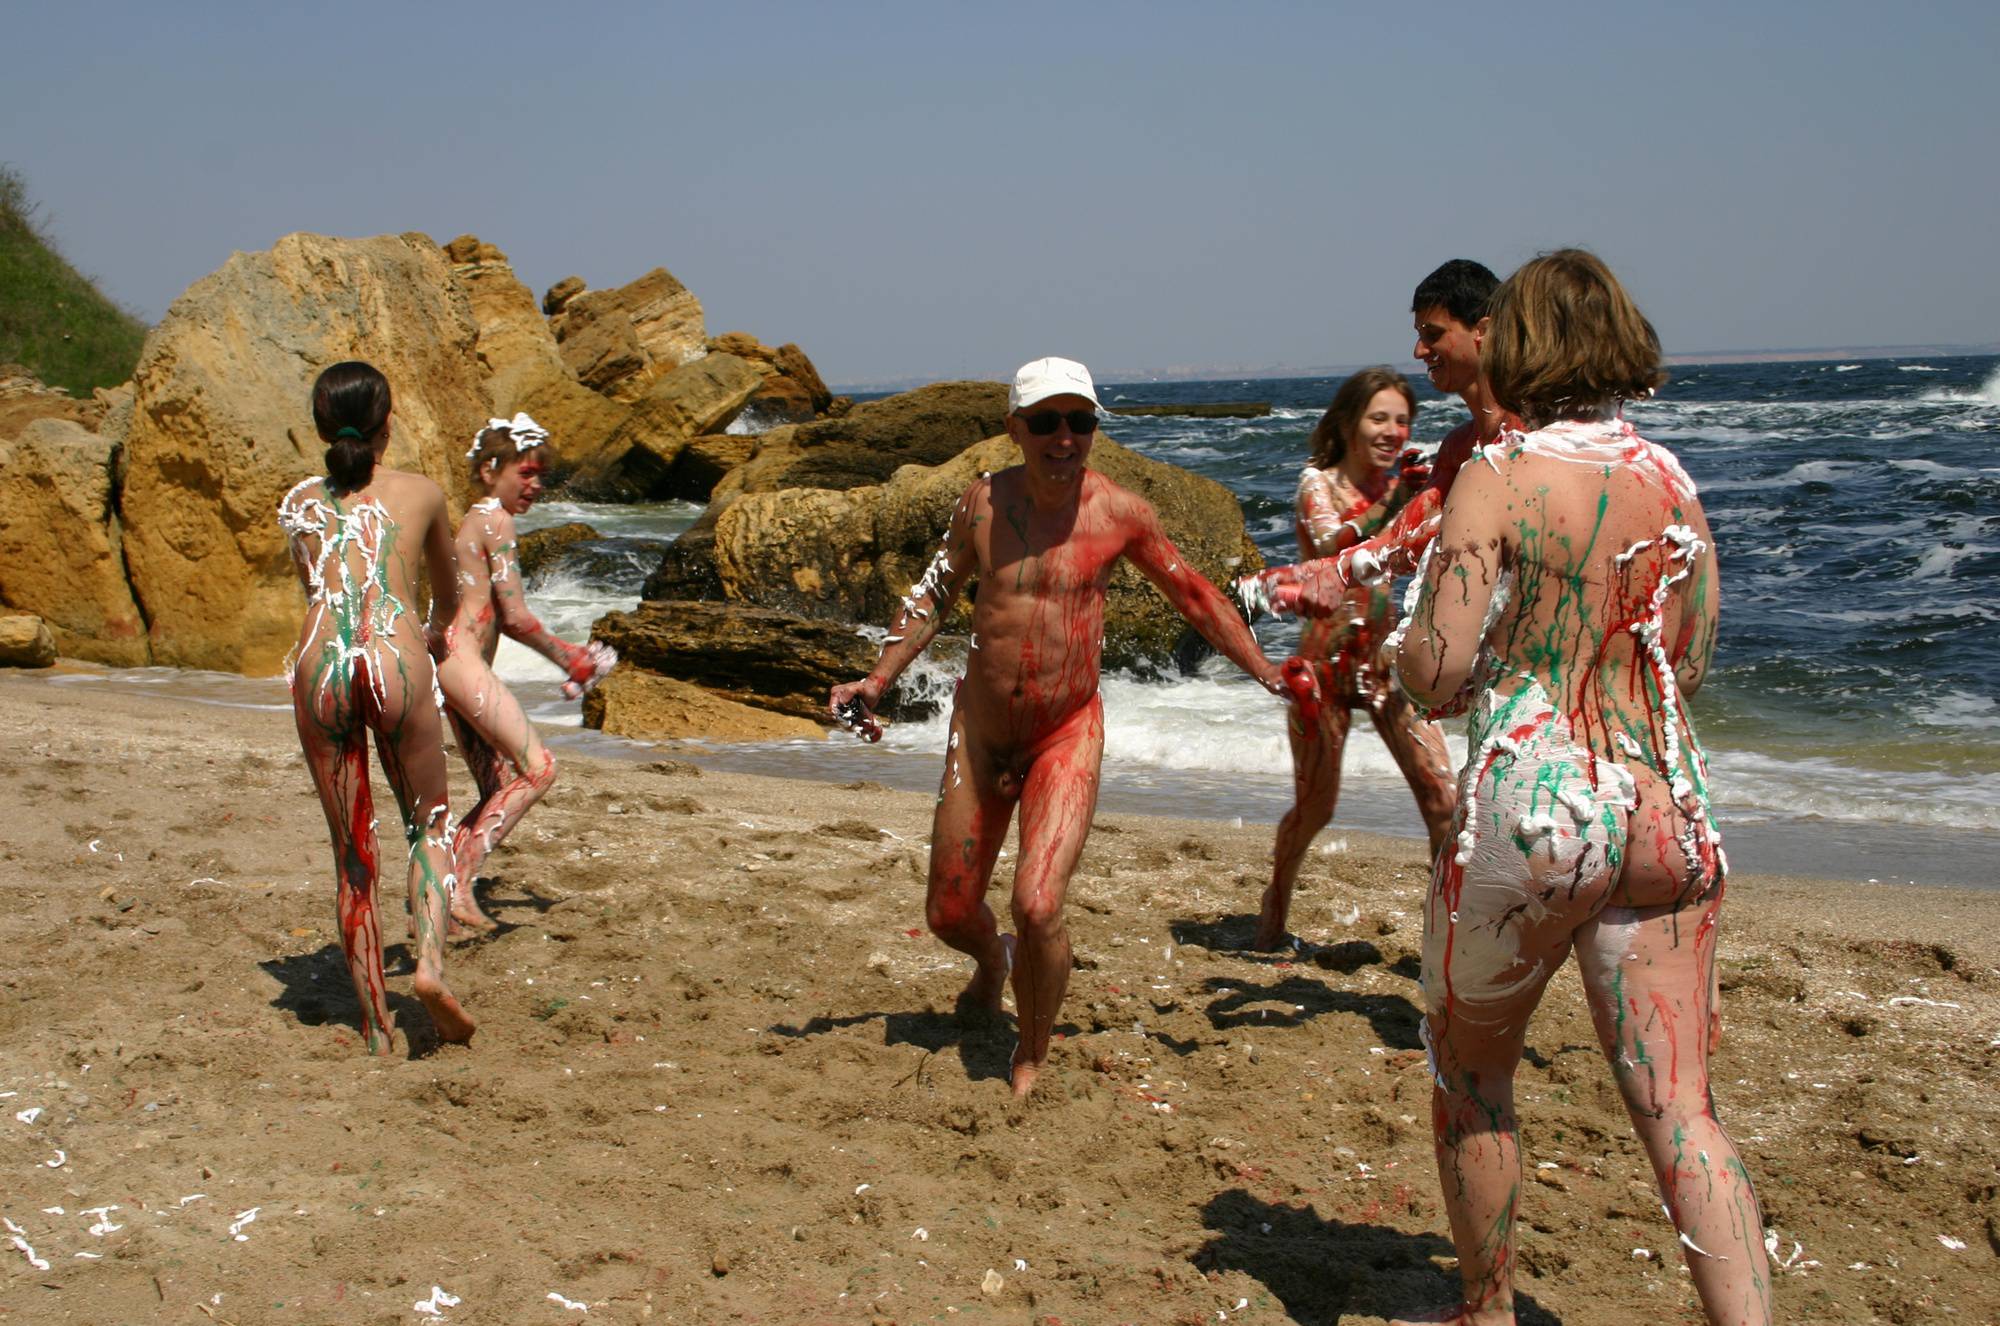 Beach Paint Fight Actions - 2